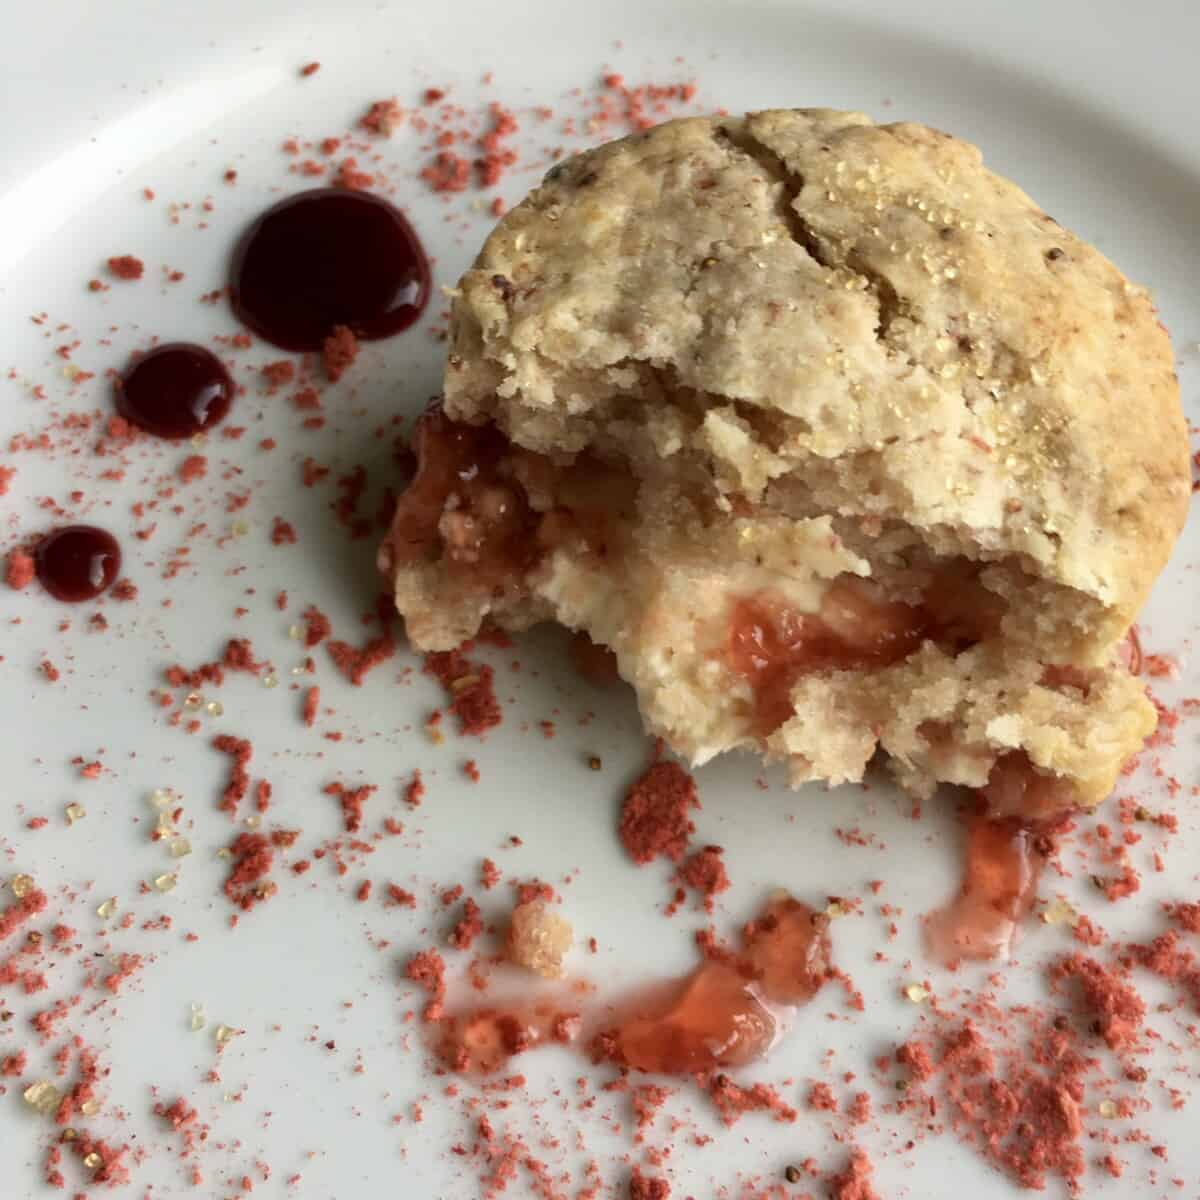 The most delicious homemade strawberry scone with half of it eaten revealing the tender crumb inside